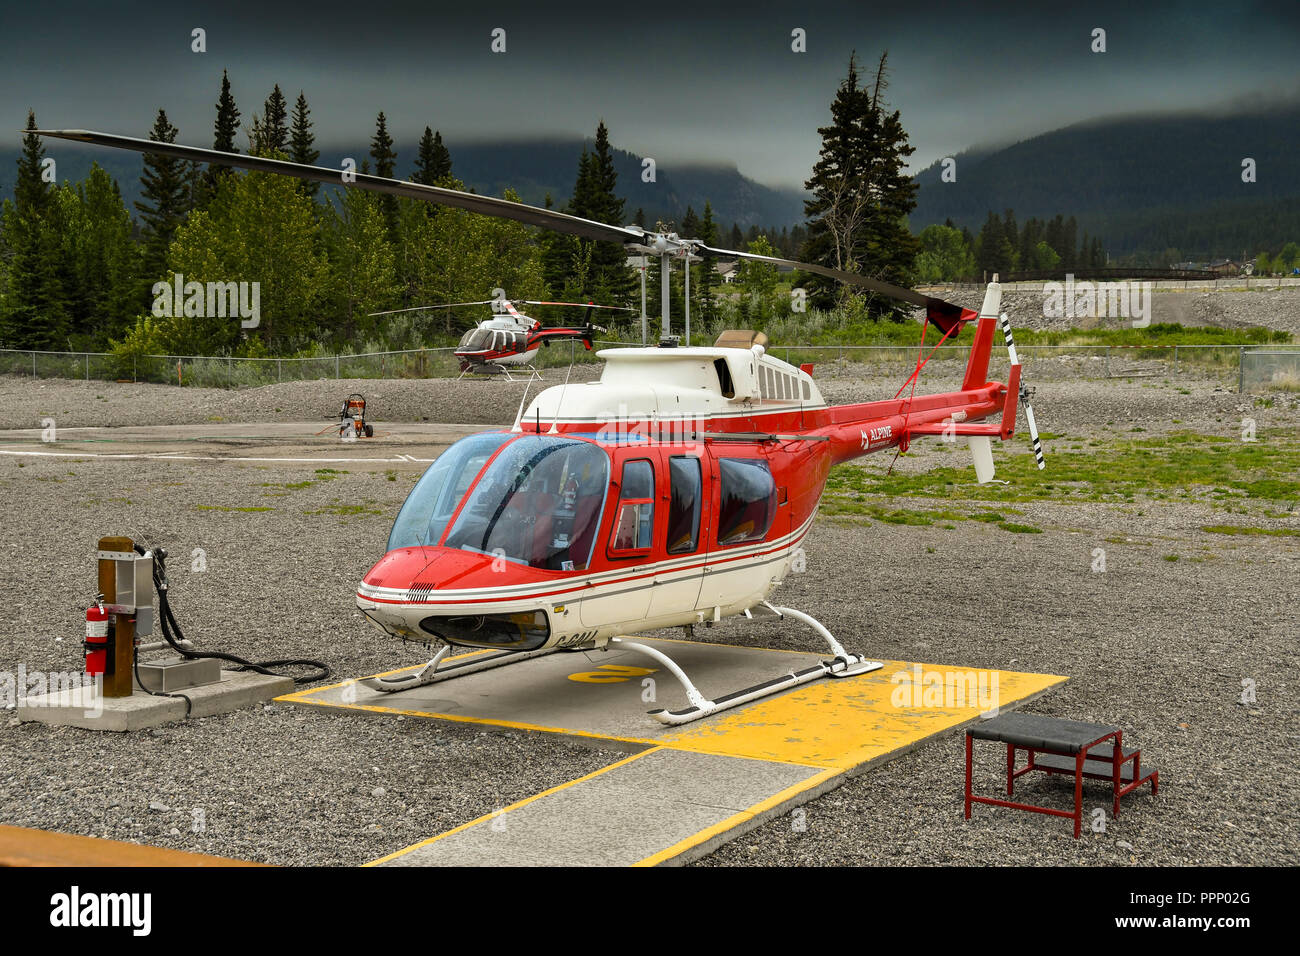 CANMORE, ALBERTA, CANADA - JUNE 2018: Bell 206 Longranger helicopter operated by Alpine Helicopters from its base in Canmore. Stock Photo